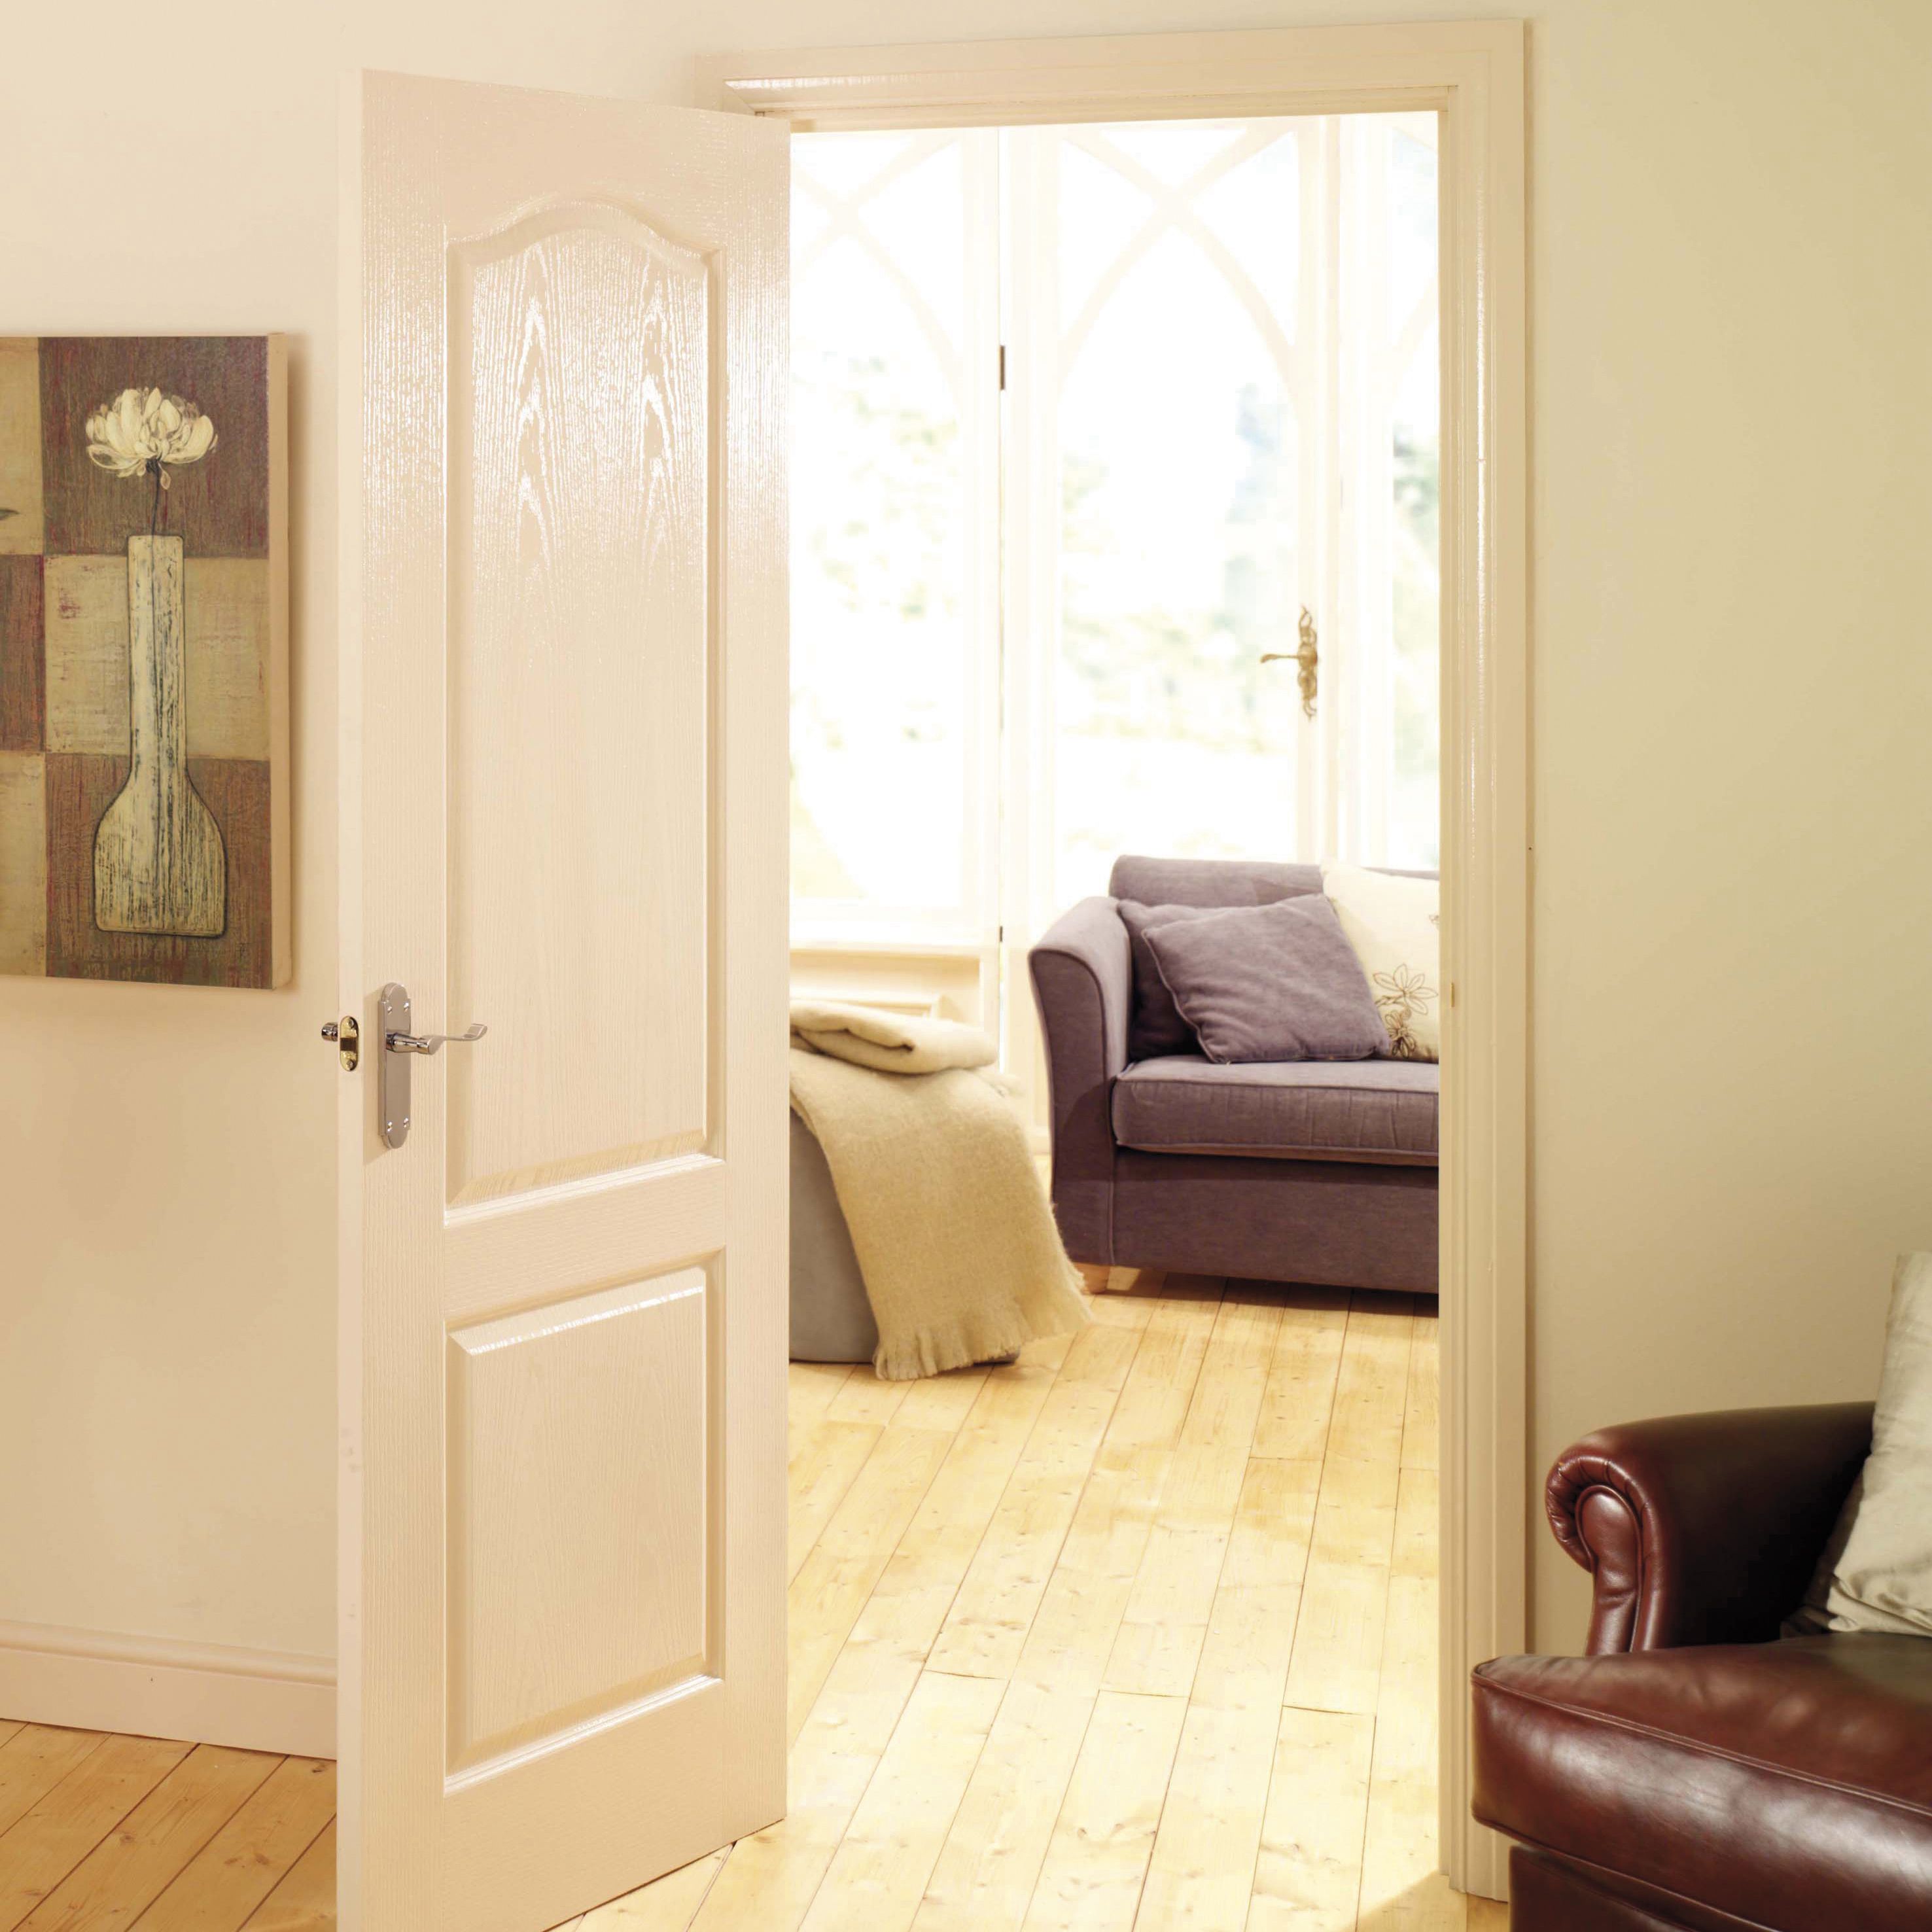 Arch painted 2 panel Unglazed Arched White Woodgrain effect Internal Door, (H)1981mm (W)610mm (T)35mm